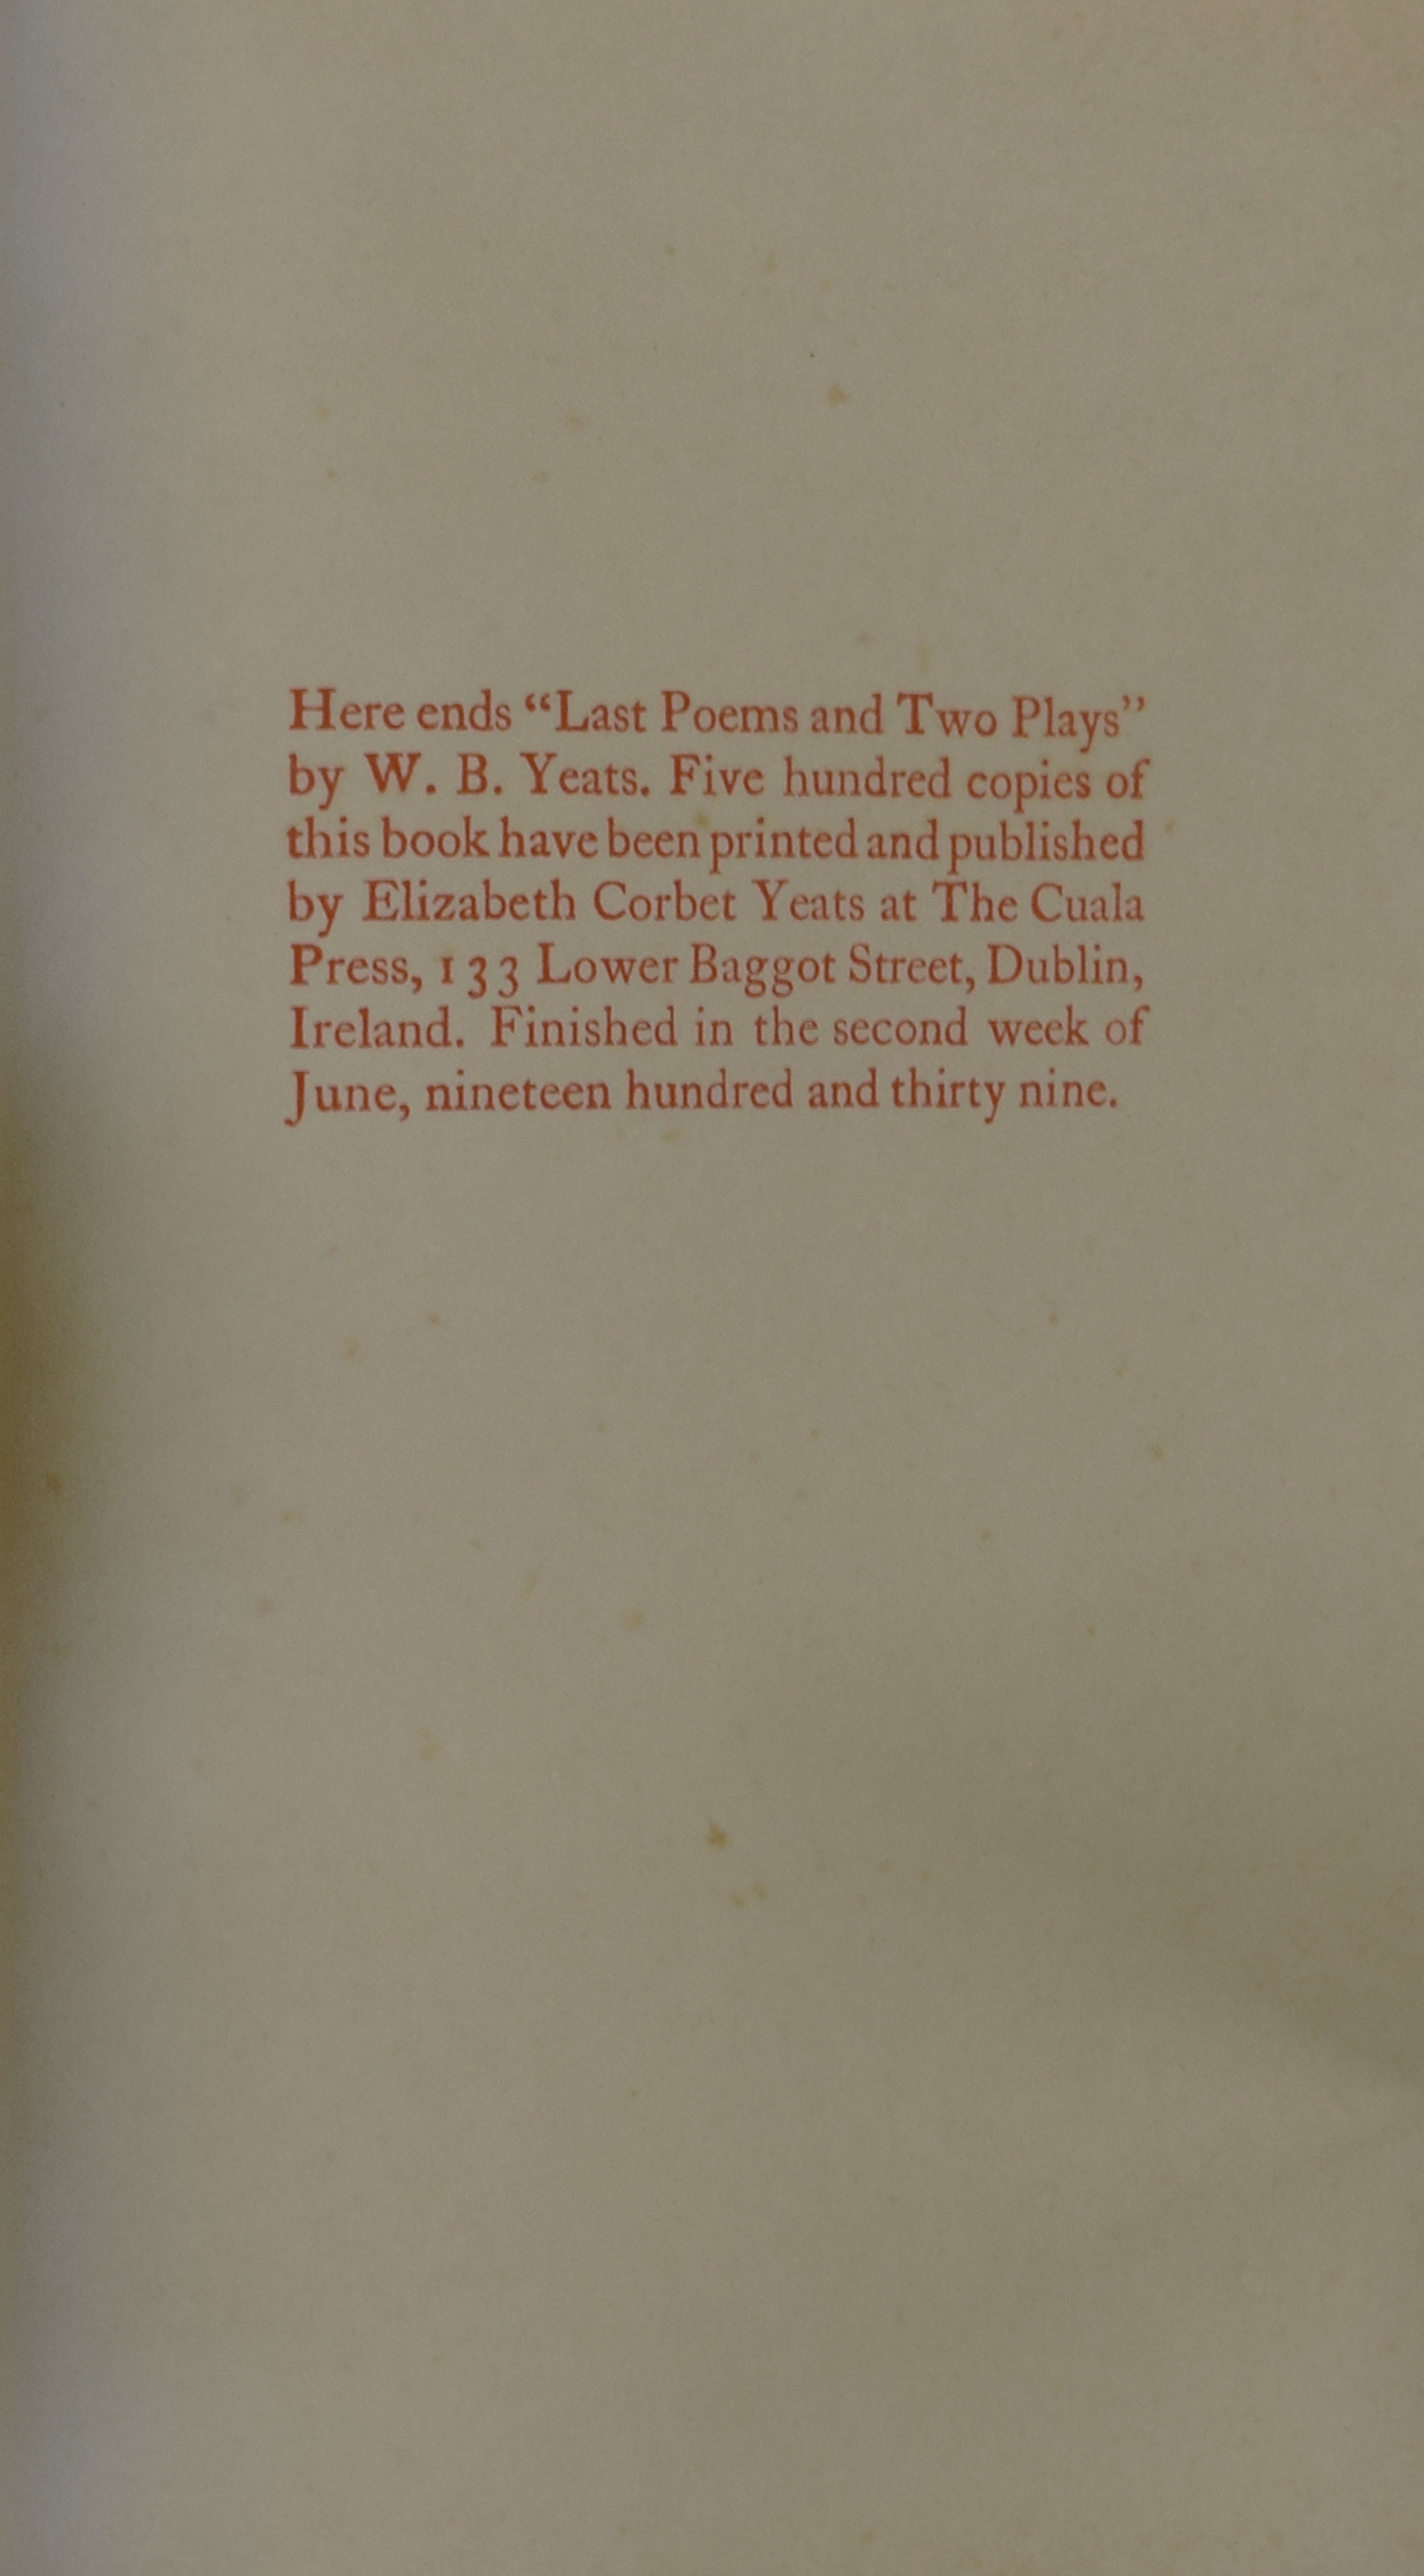 Last Poems and Two Plays by William Butler Yeats. Limited Edition. Cuala Press.